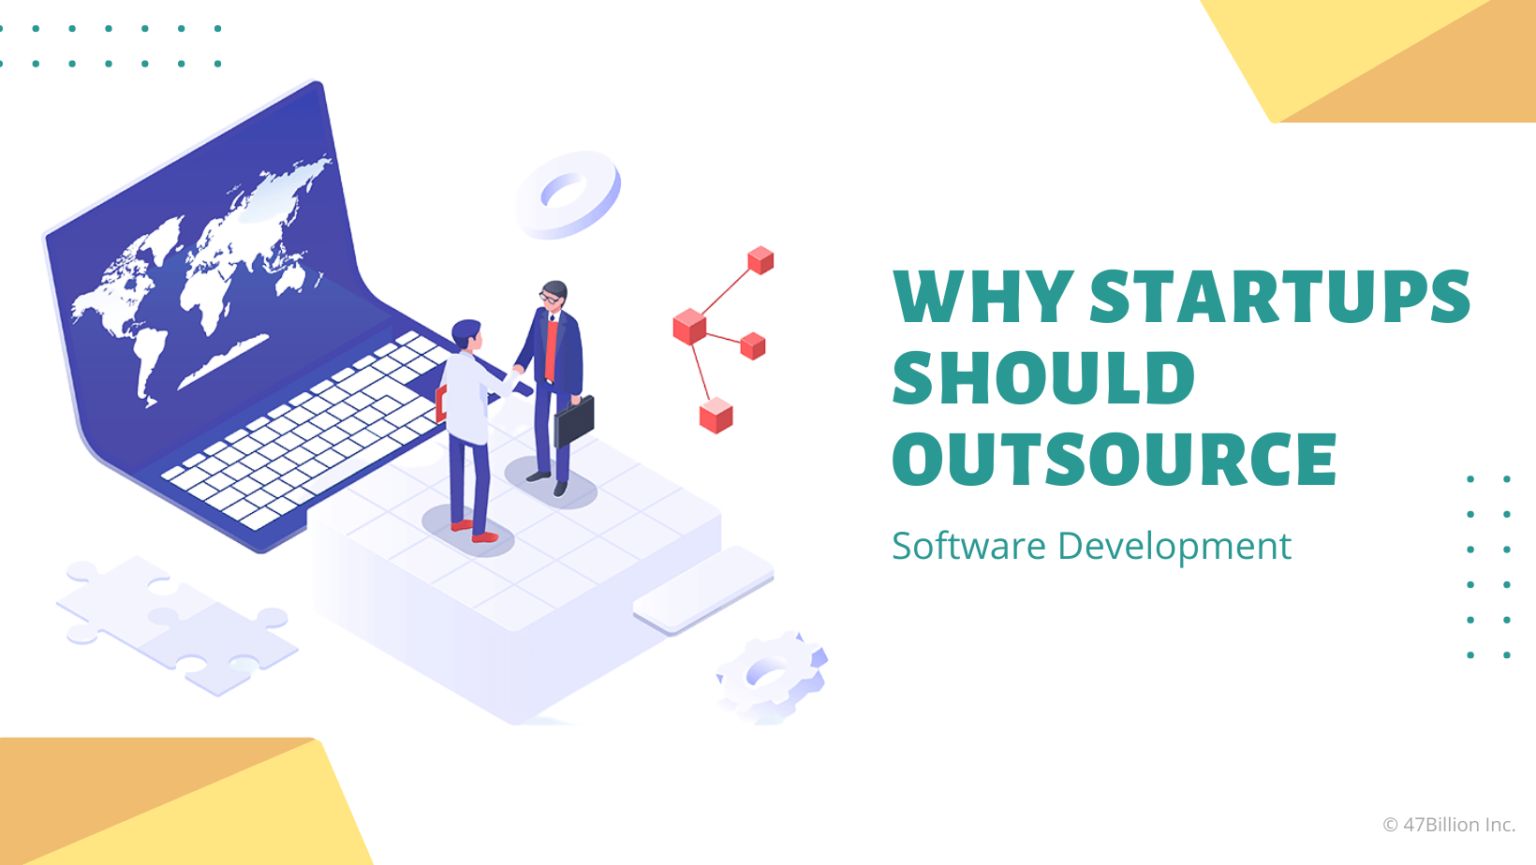 Why are Startups Considering Outsourcing Software Development?